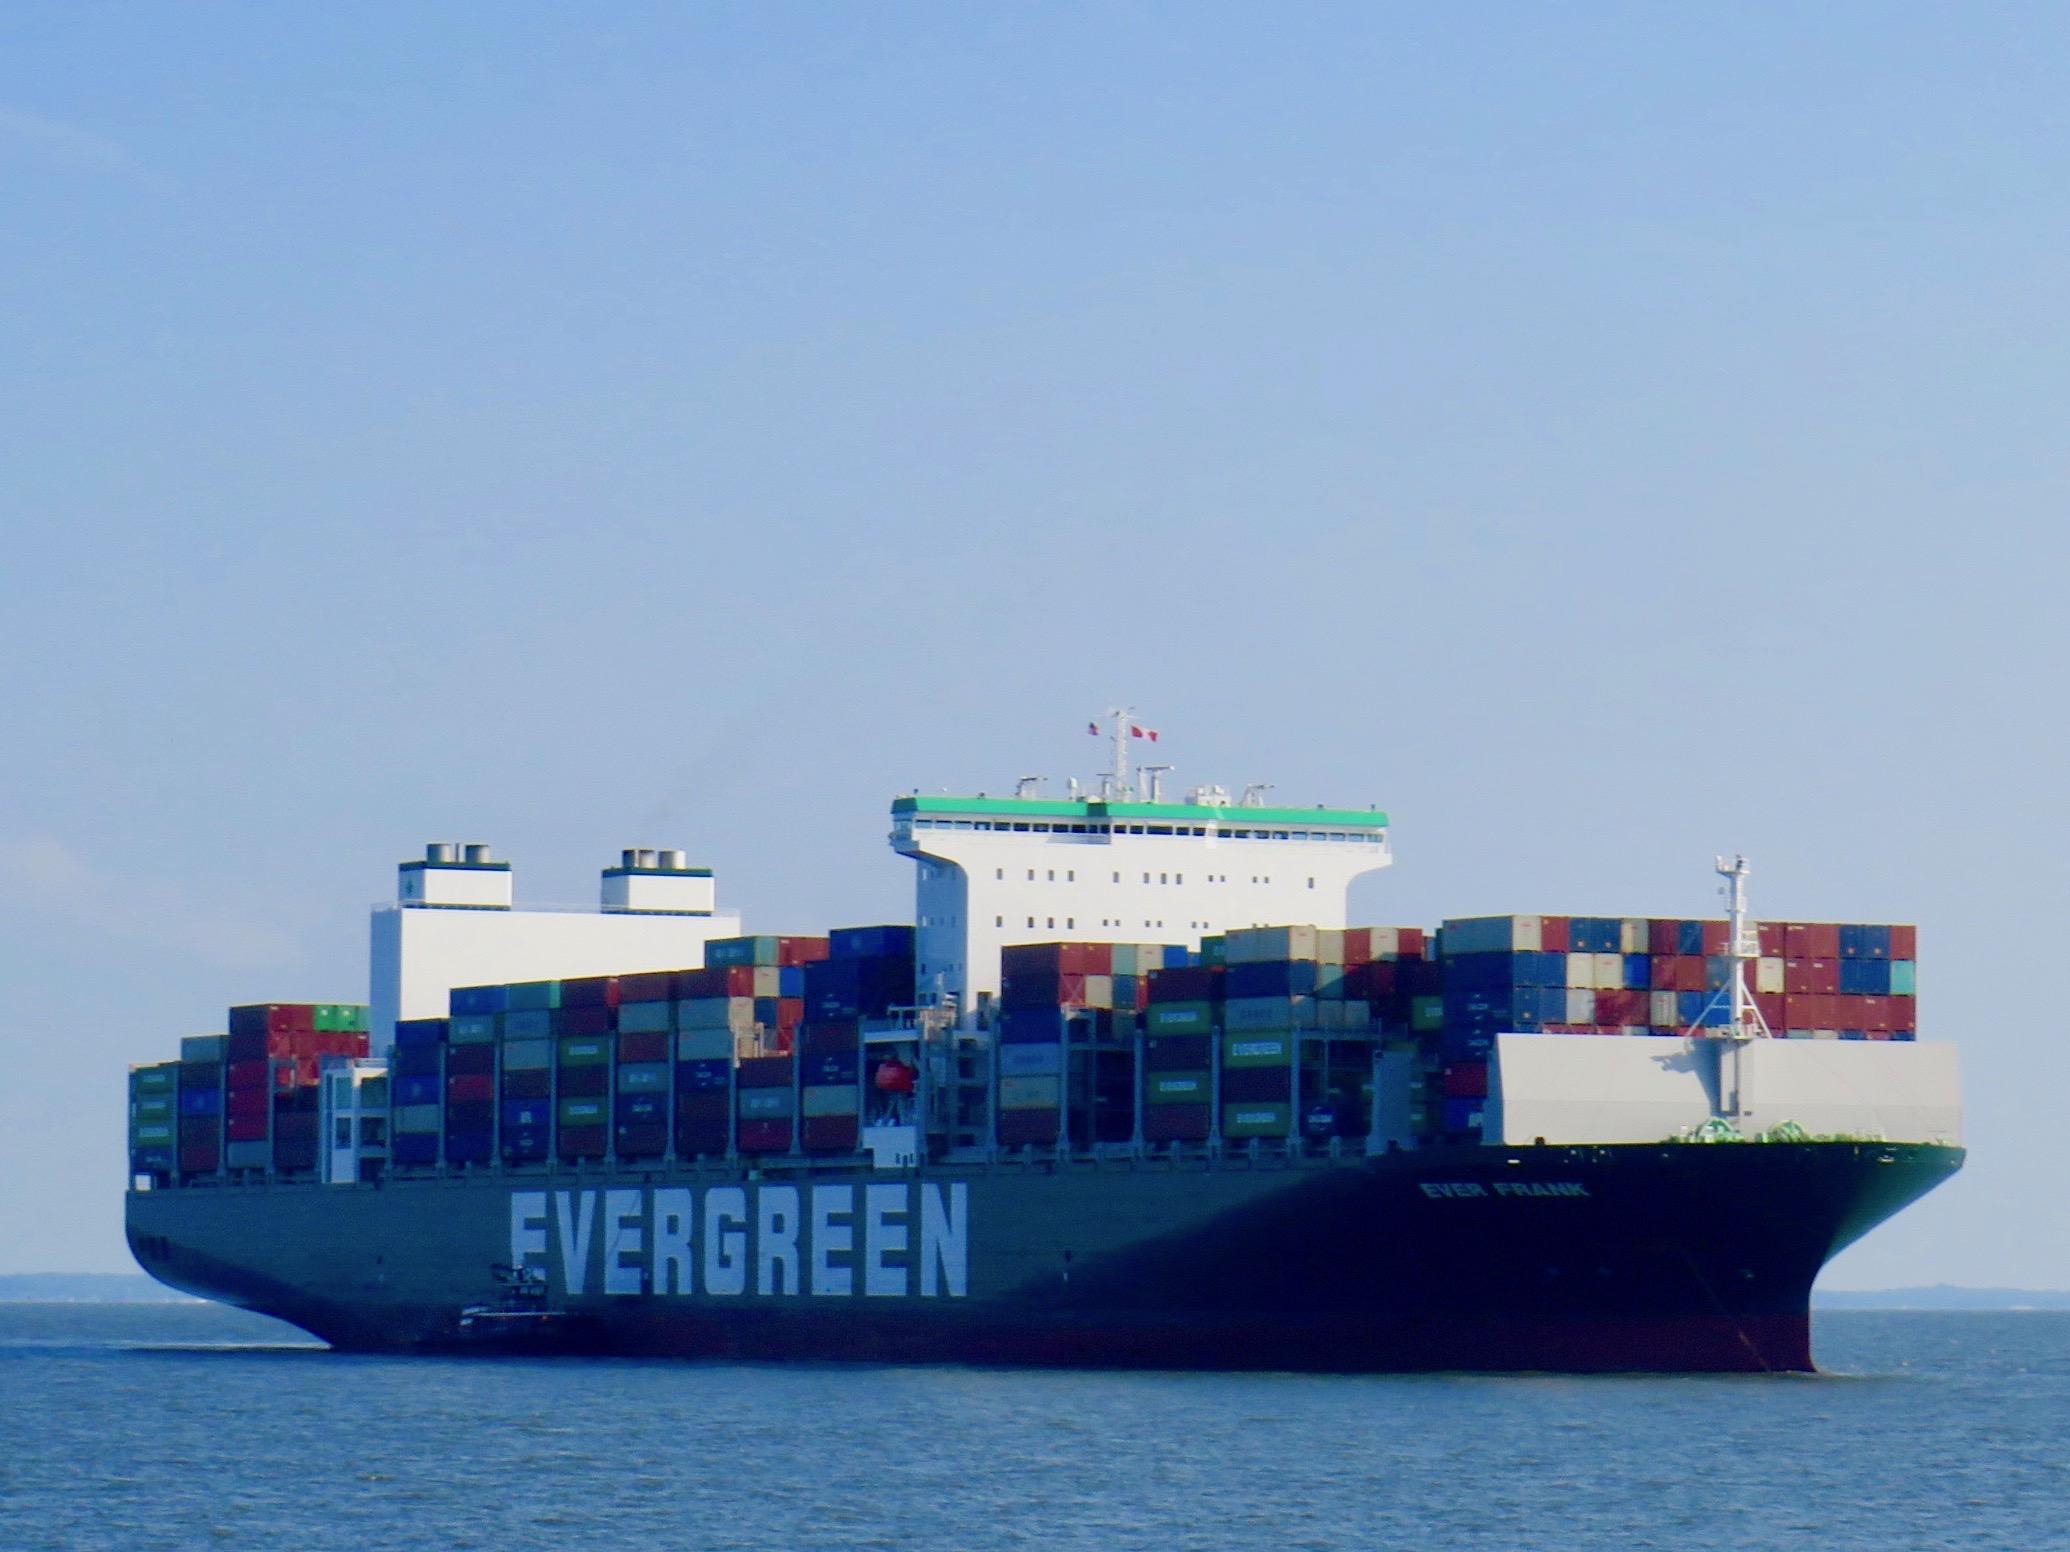 Tugboat guides massive containership arriving in NY-NJ harbor